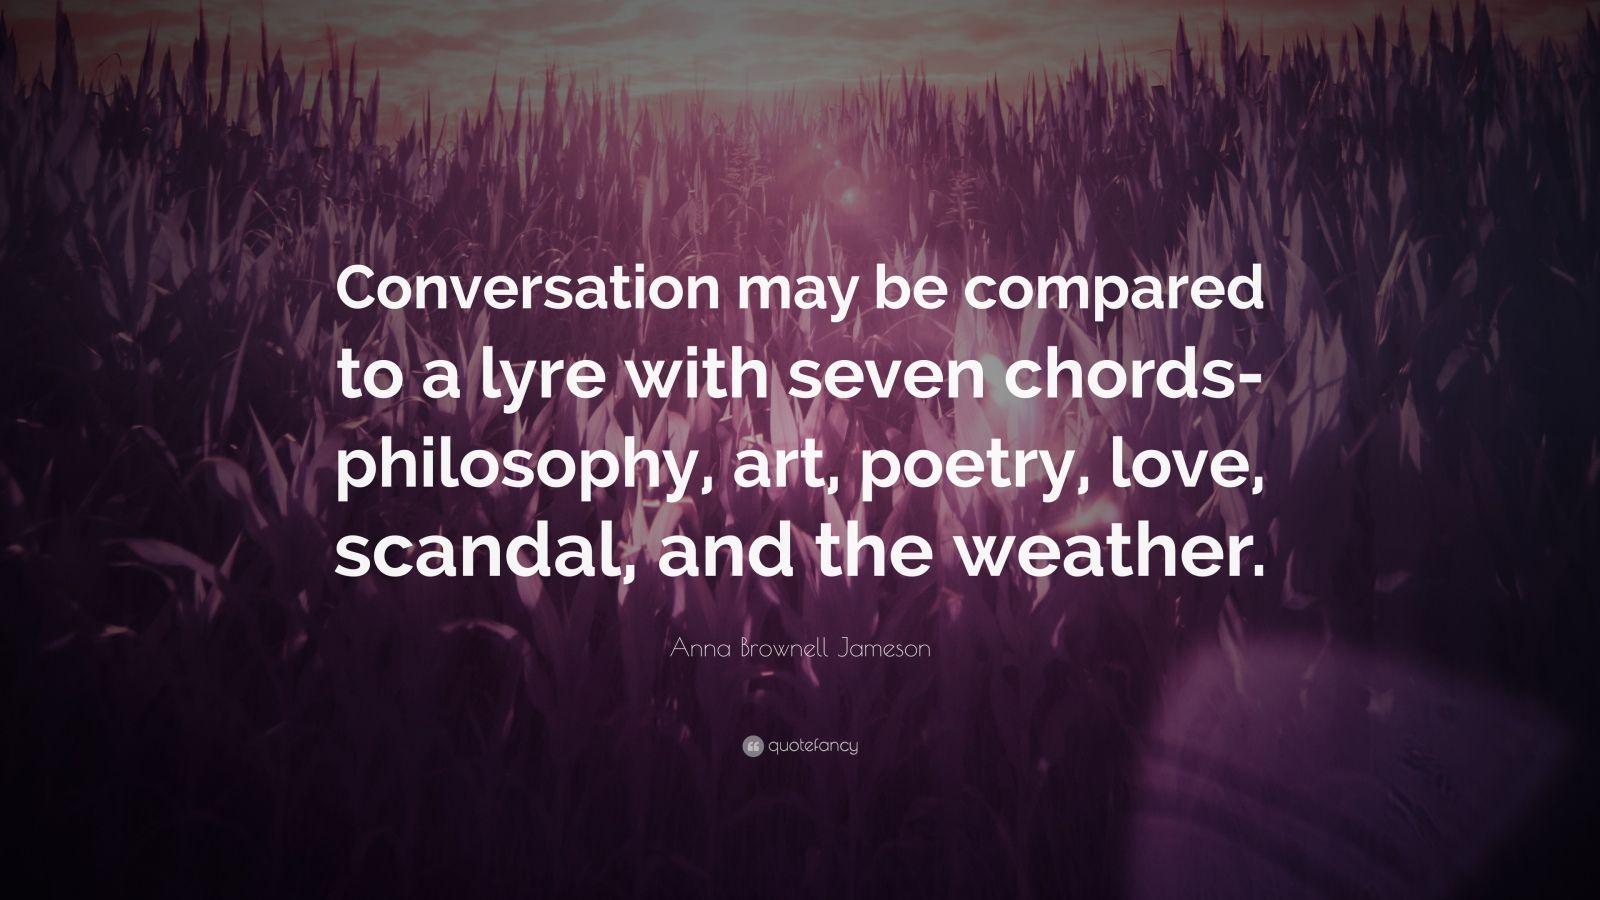 Anna Brownell Jameson Quote: “Conversation may be compared to a lyre